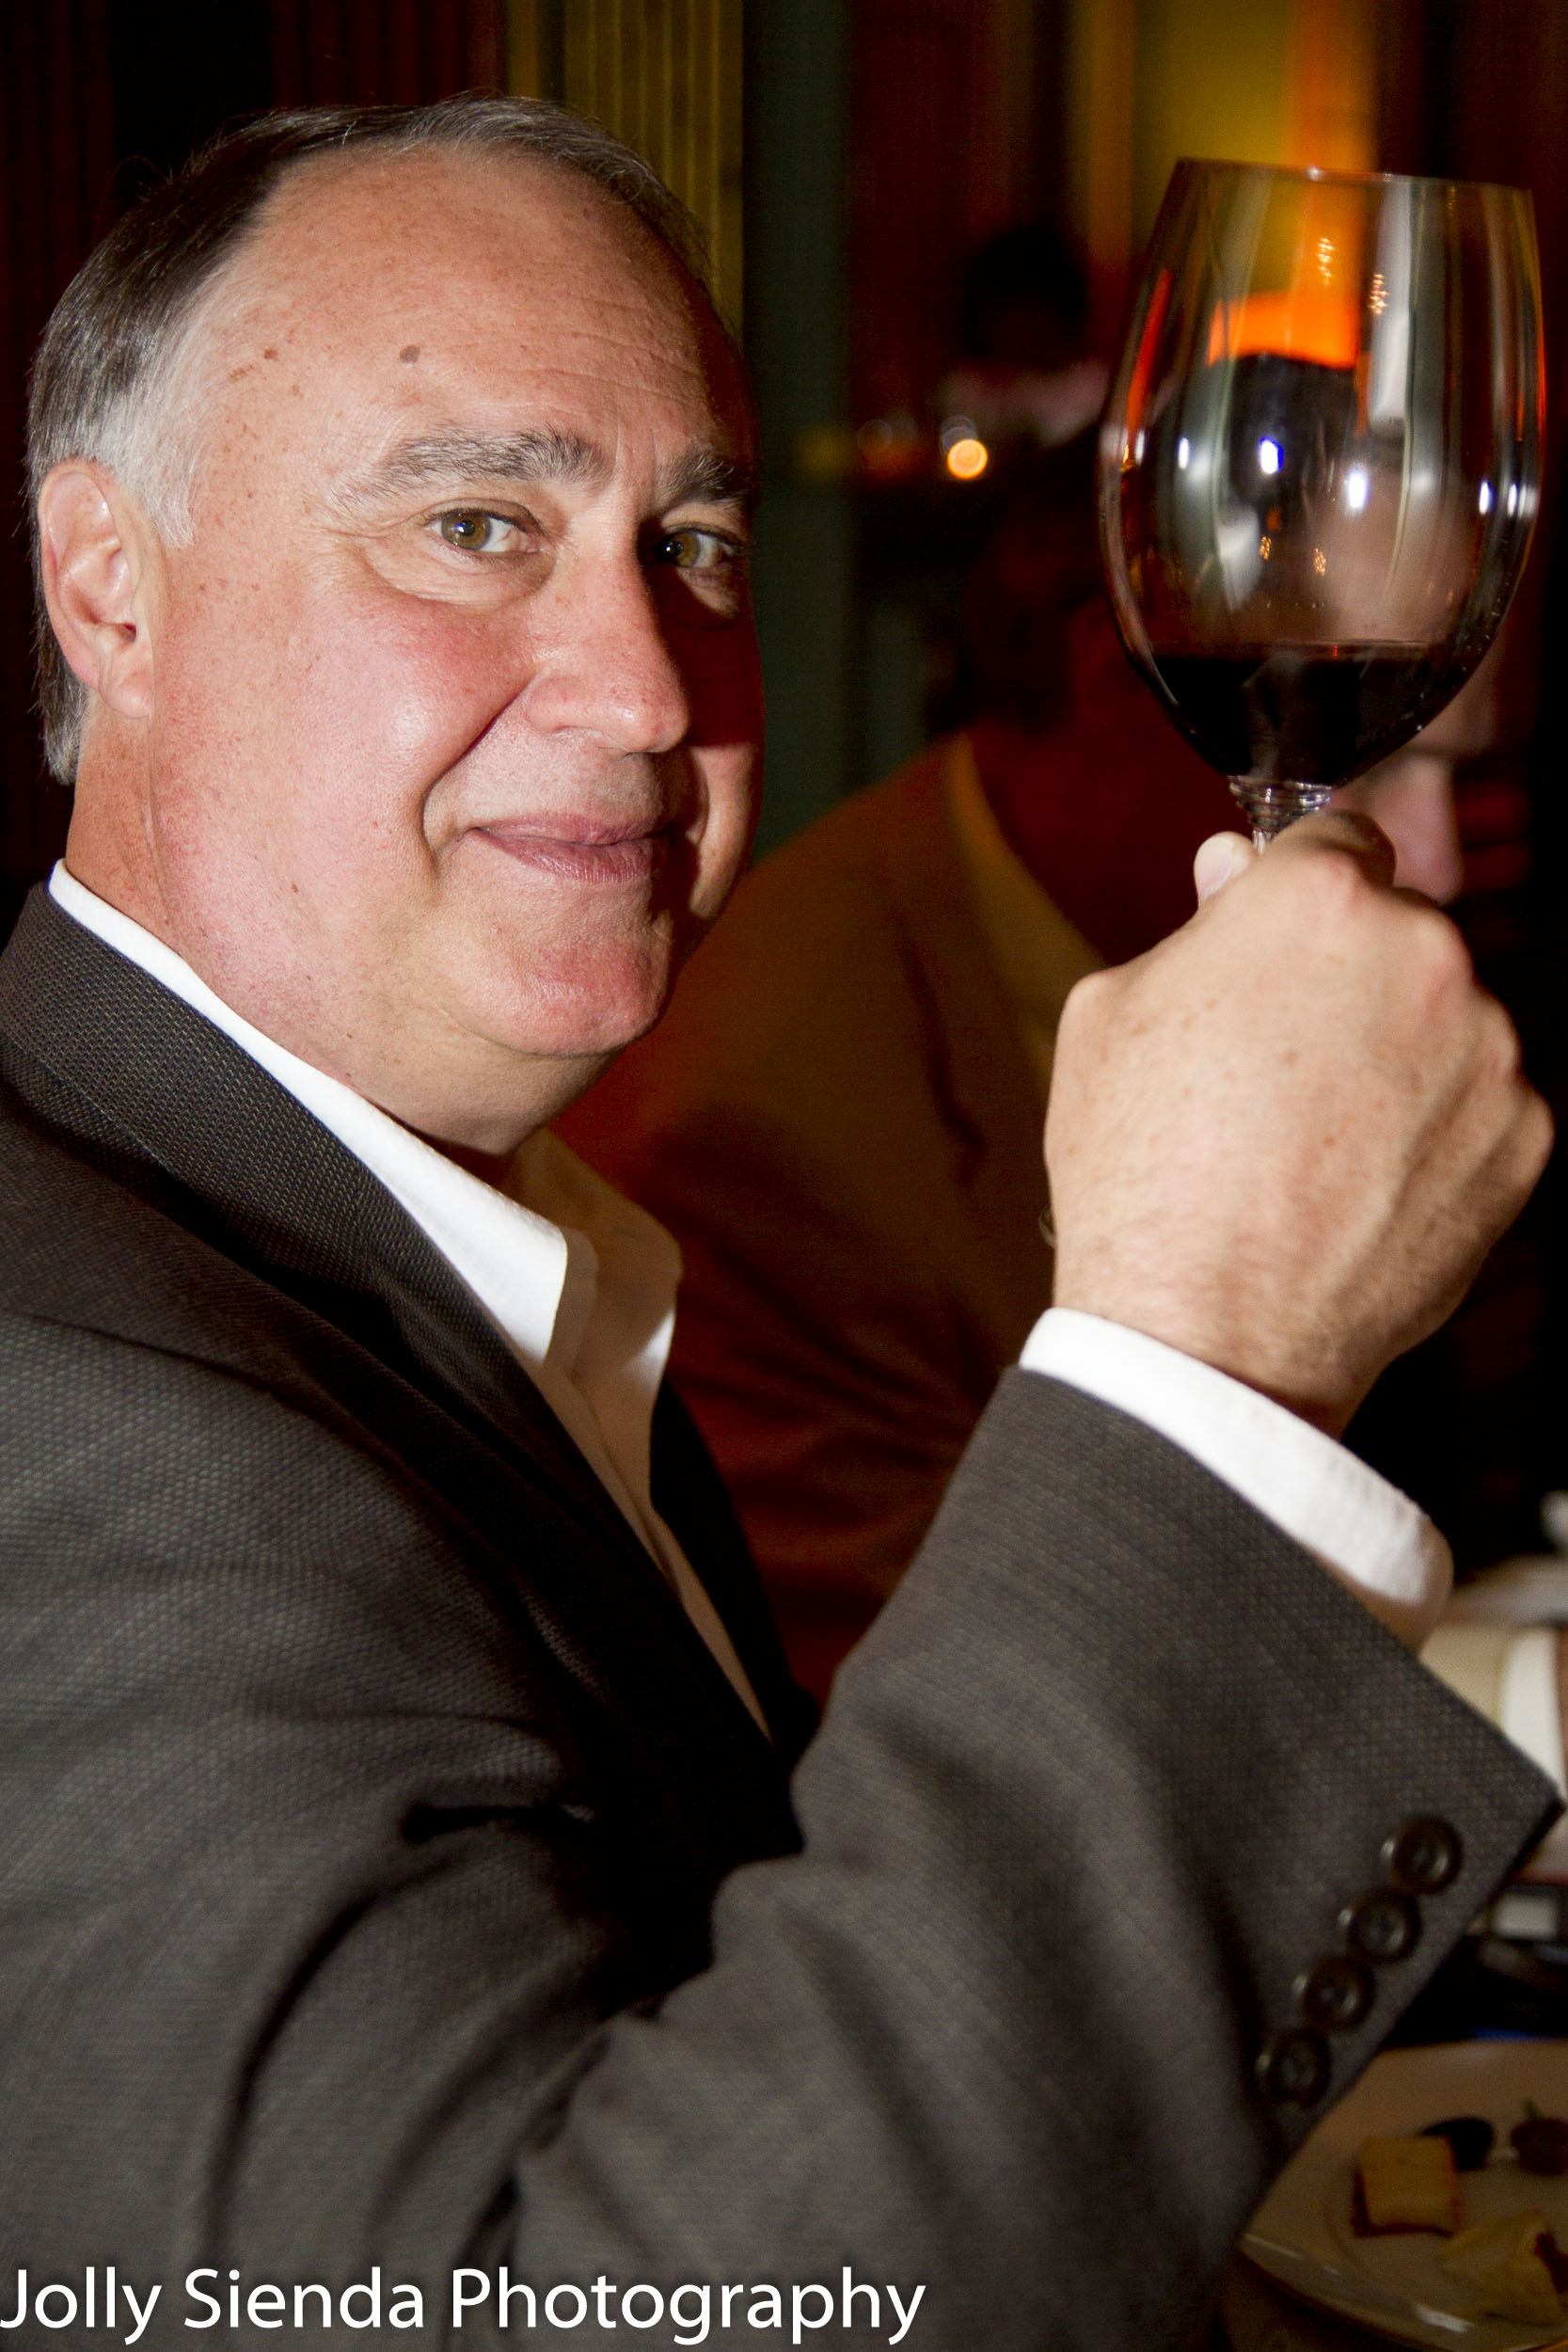 Portrait of a man making a toast with a glass of wine